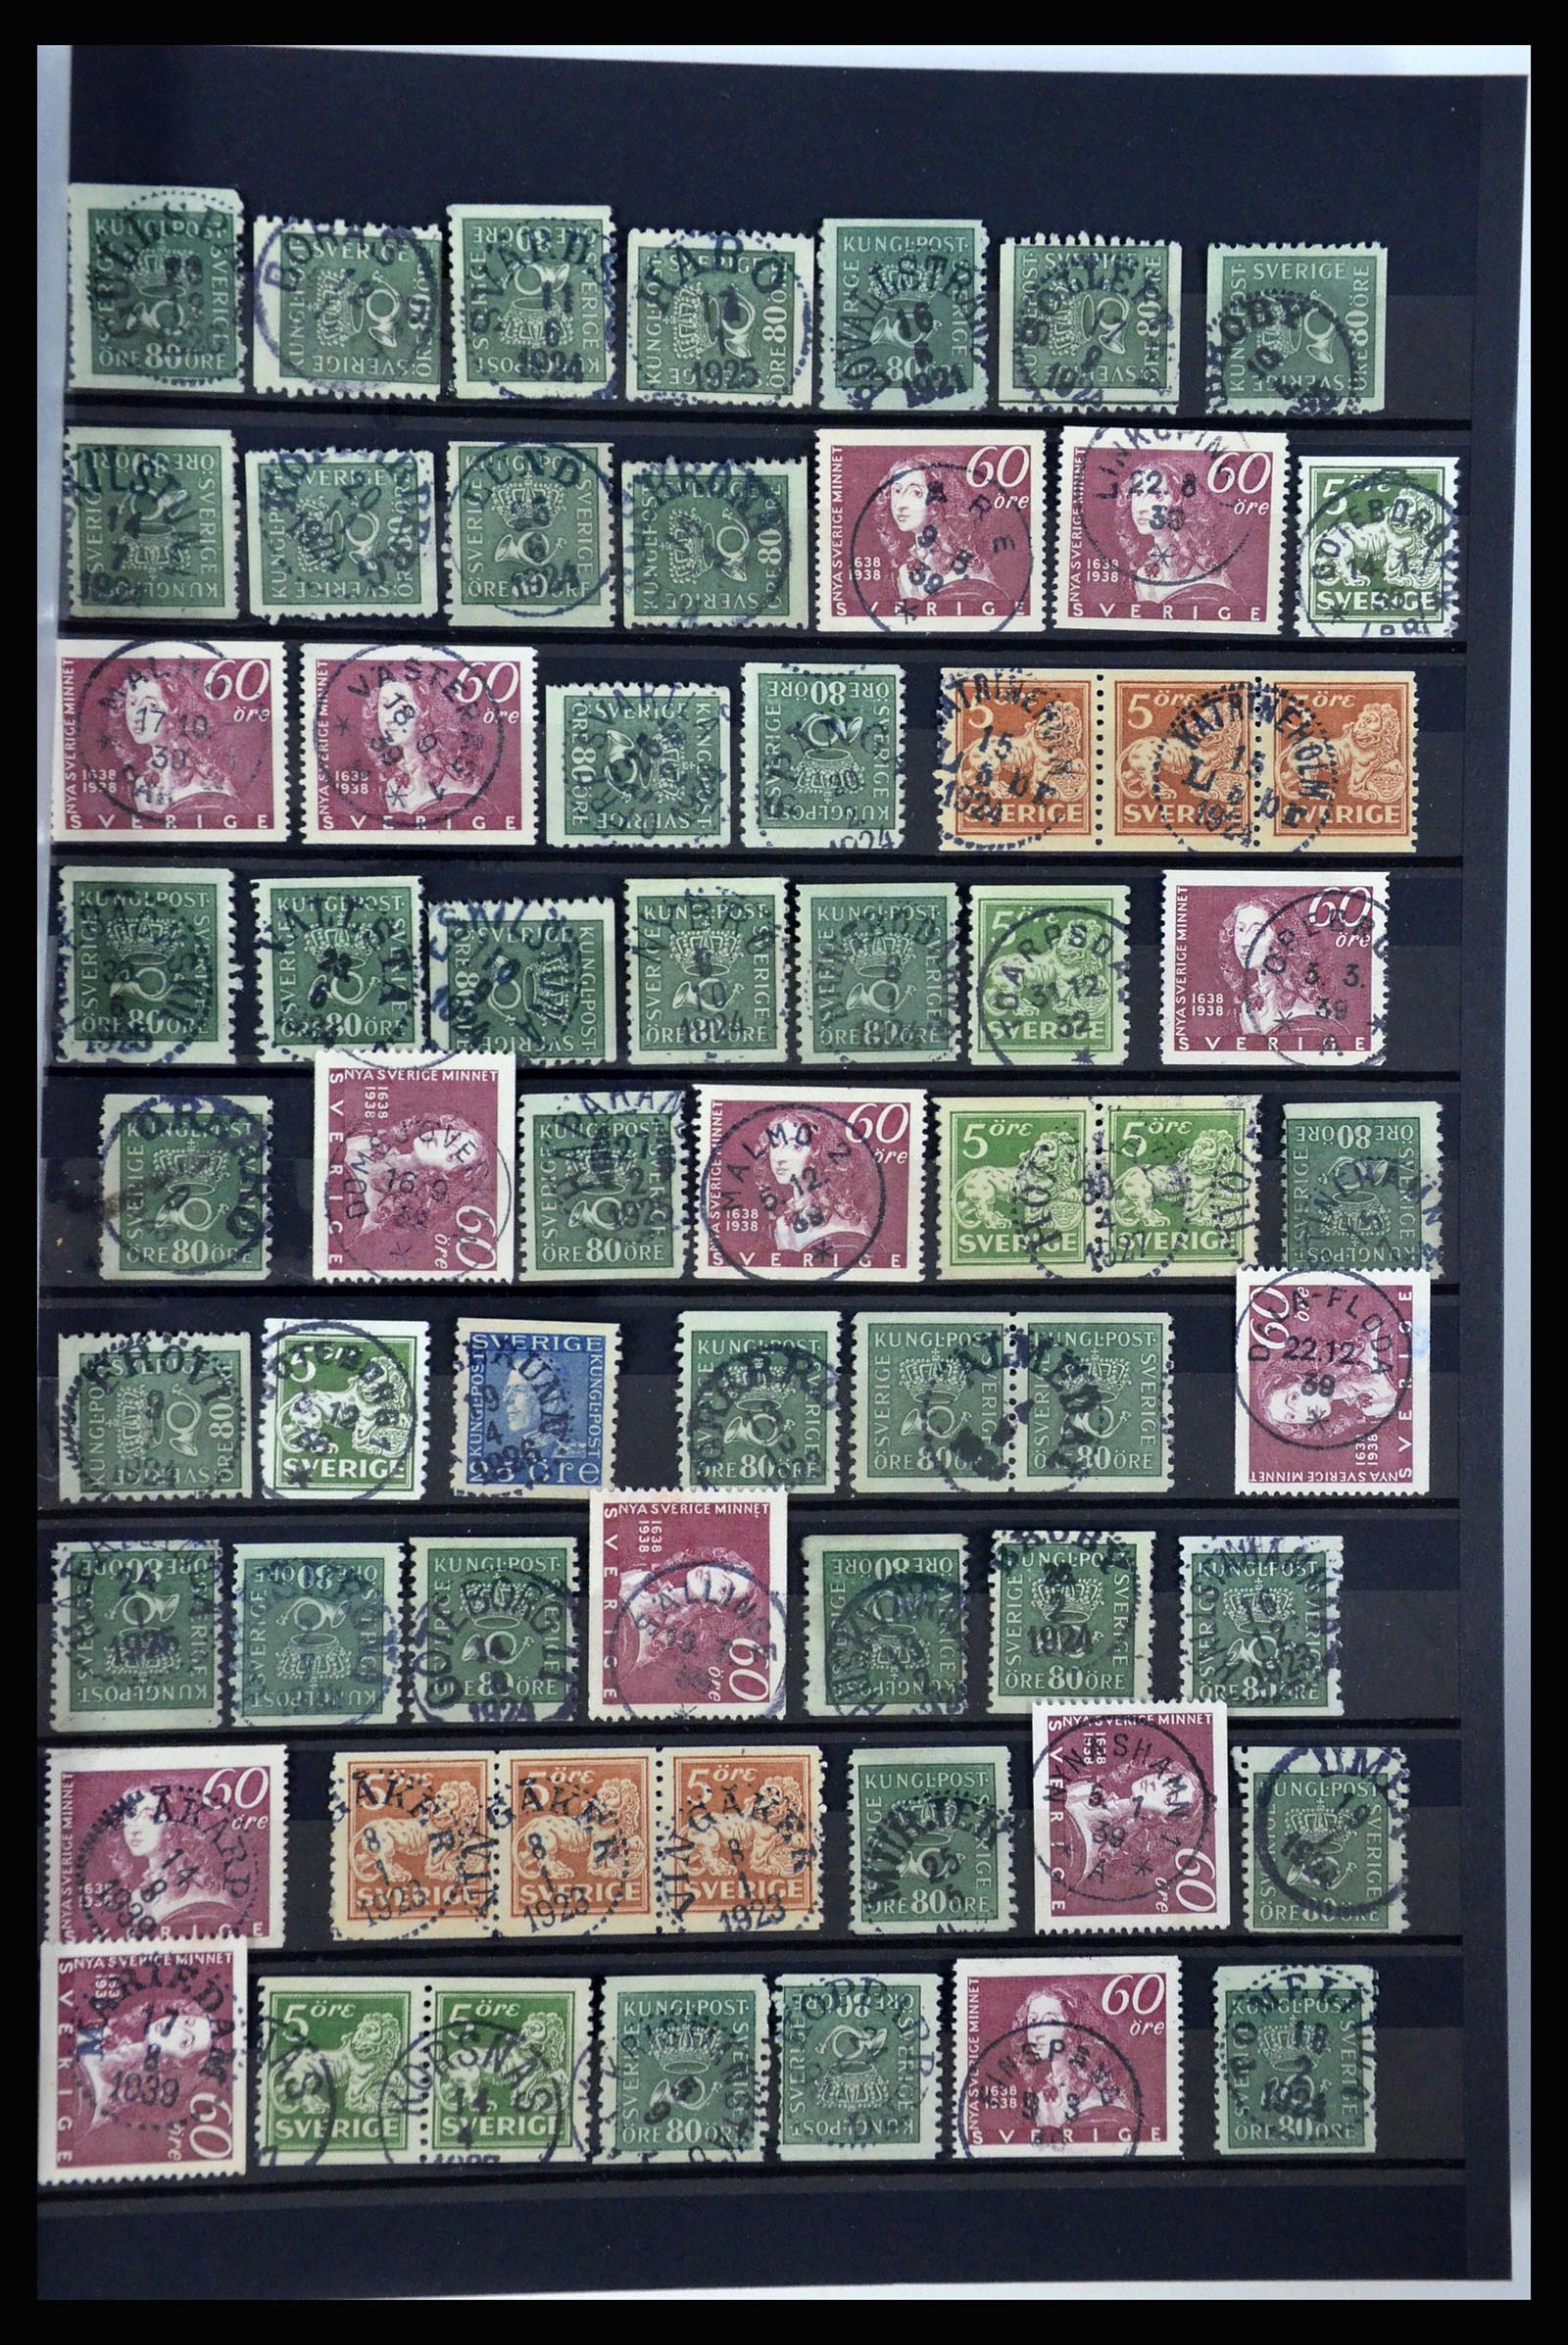 36316 001 - Stamp collection 36316 Sweden cancellations 1920-1938.